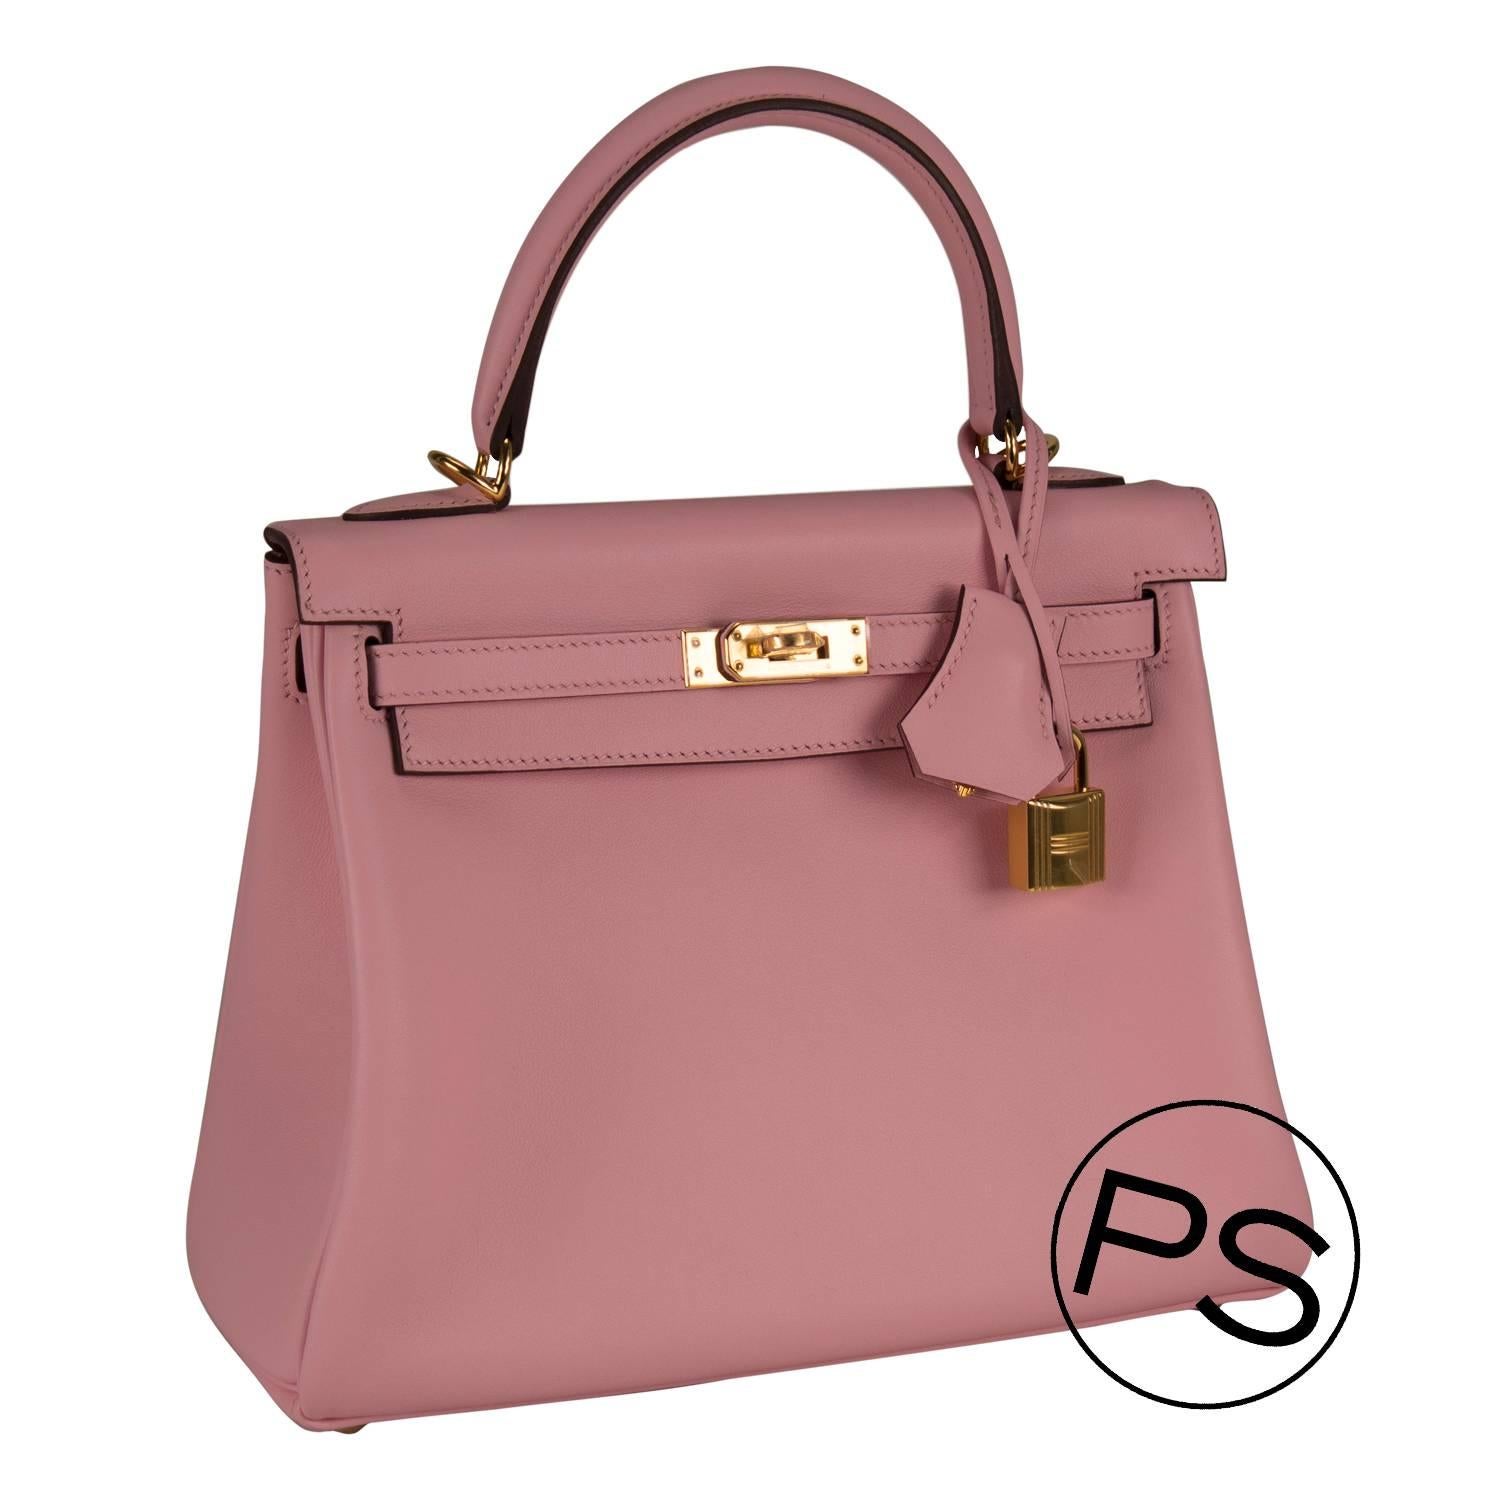 Hermes Handbag Kelly II Retourne  25 Swift Pink Sakura Gold Hardware 2015.

Bougth it in hermes store in 2015.

Pre-owned and never used

Model:  Kelly II Retourne

Color: Rose  sakura.

Size: 25x20x13cm

Details:

With the protective